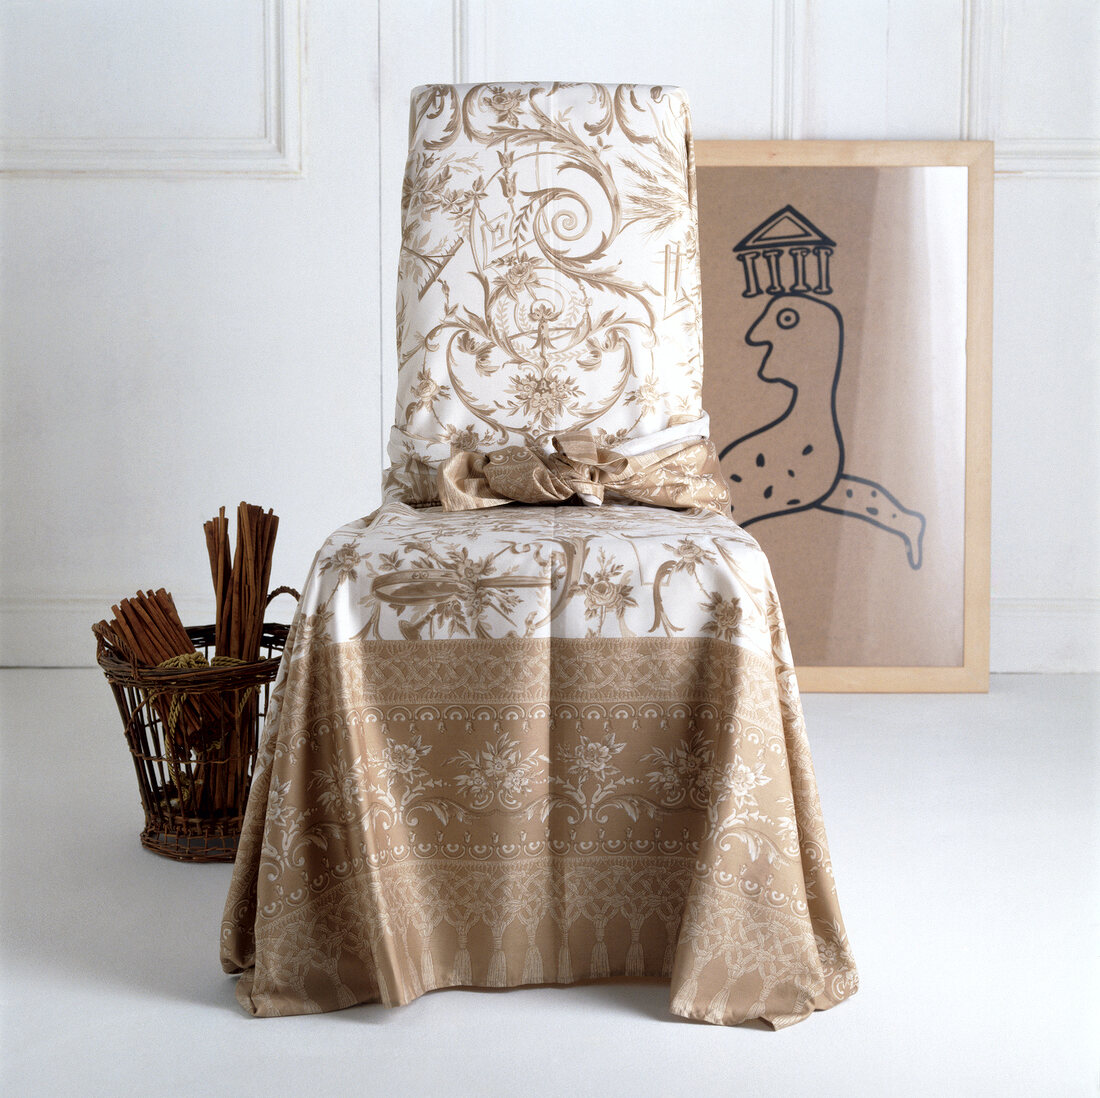 Chair covered with beige and white coloured cover and basket by side